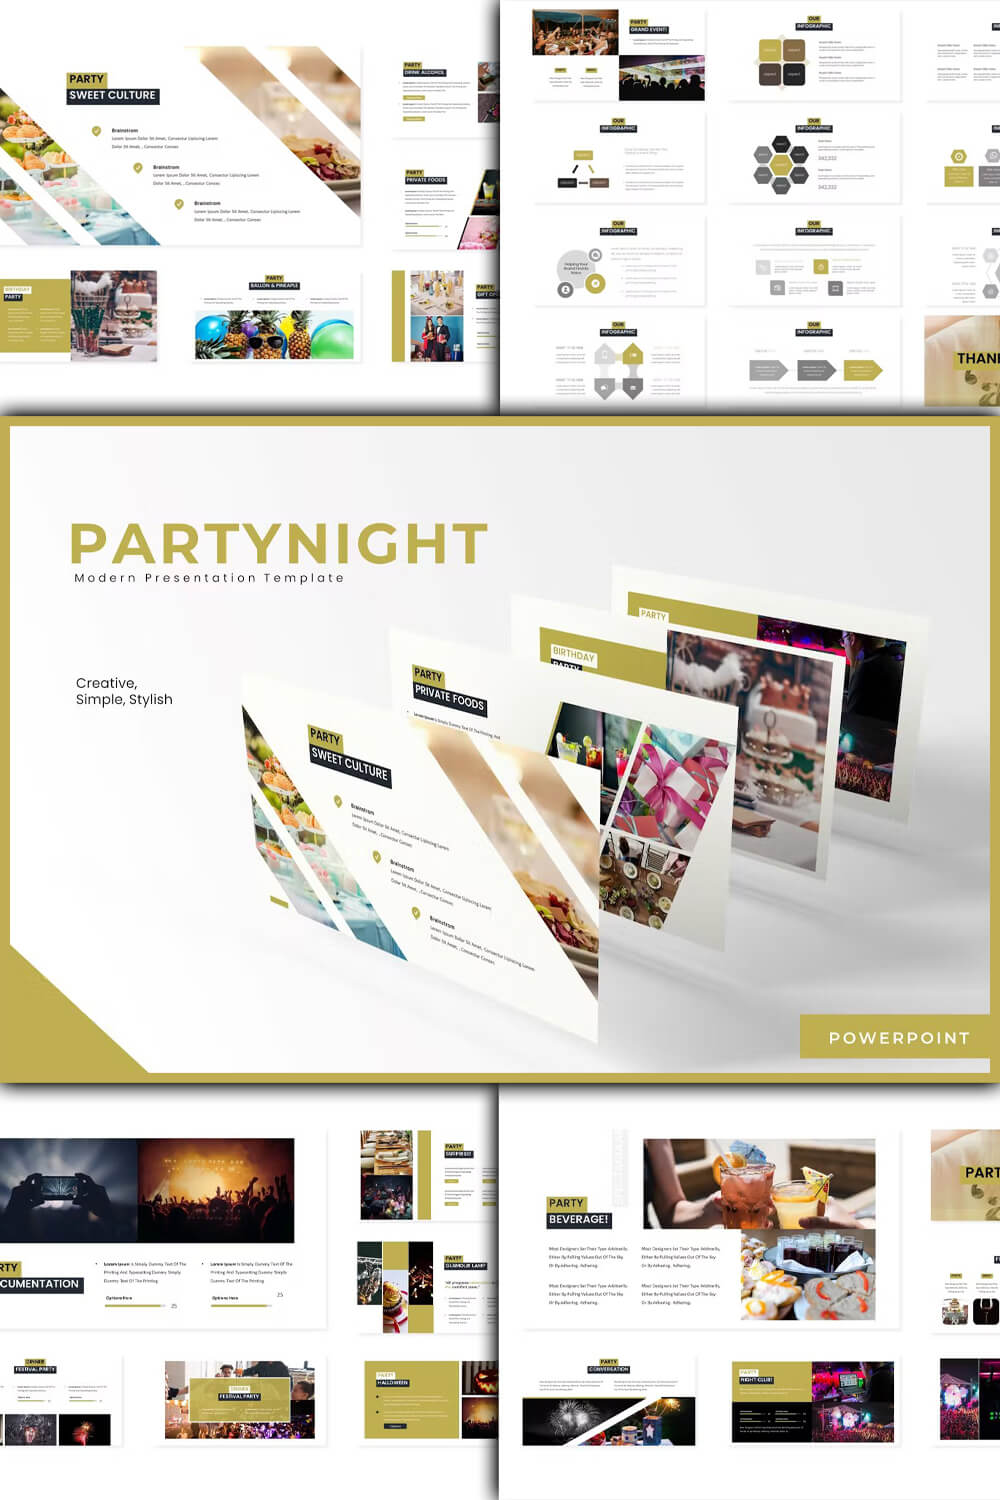 Components of partynight modern presentation template.